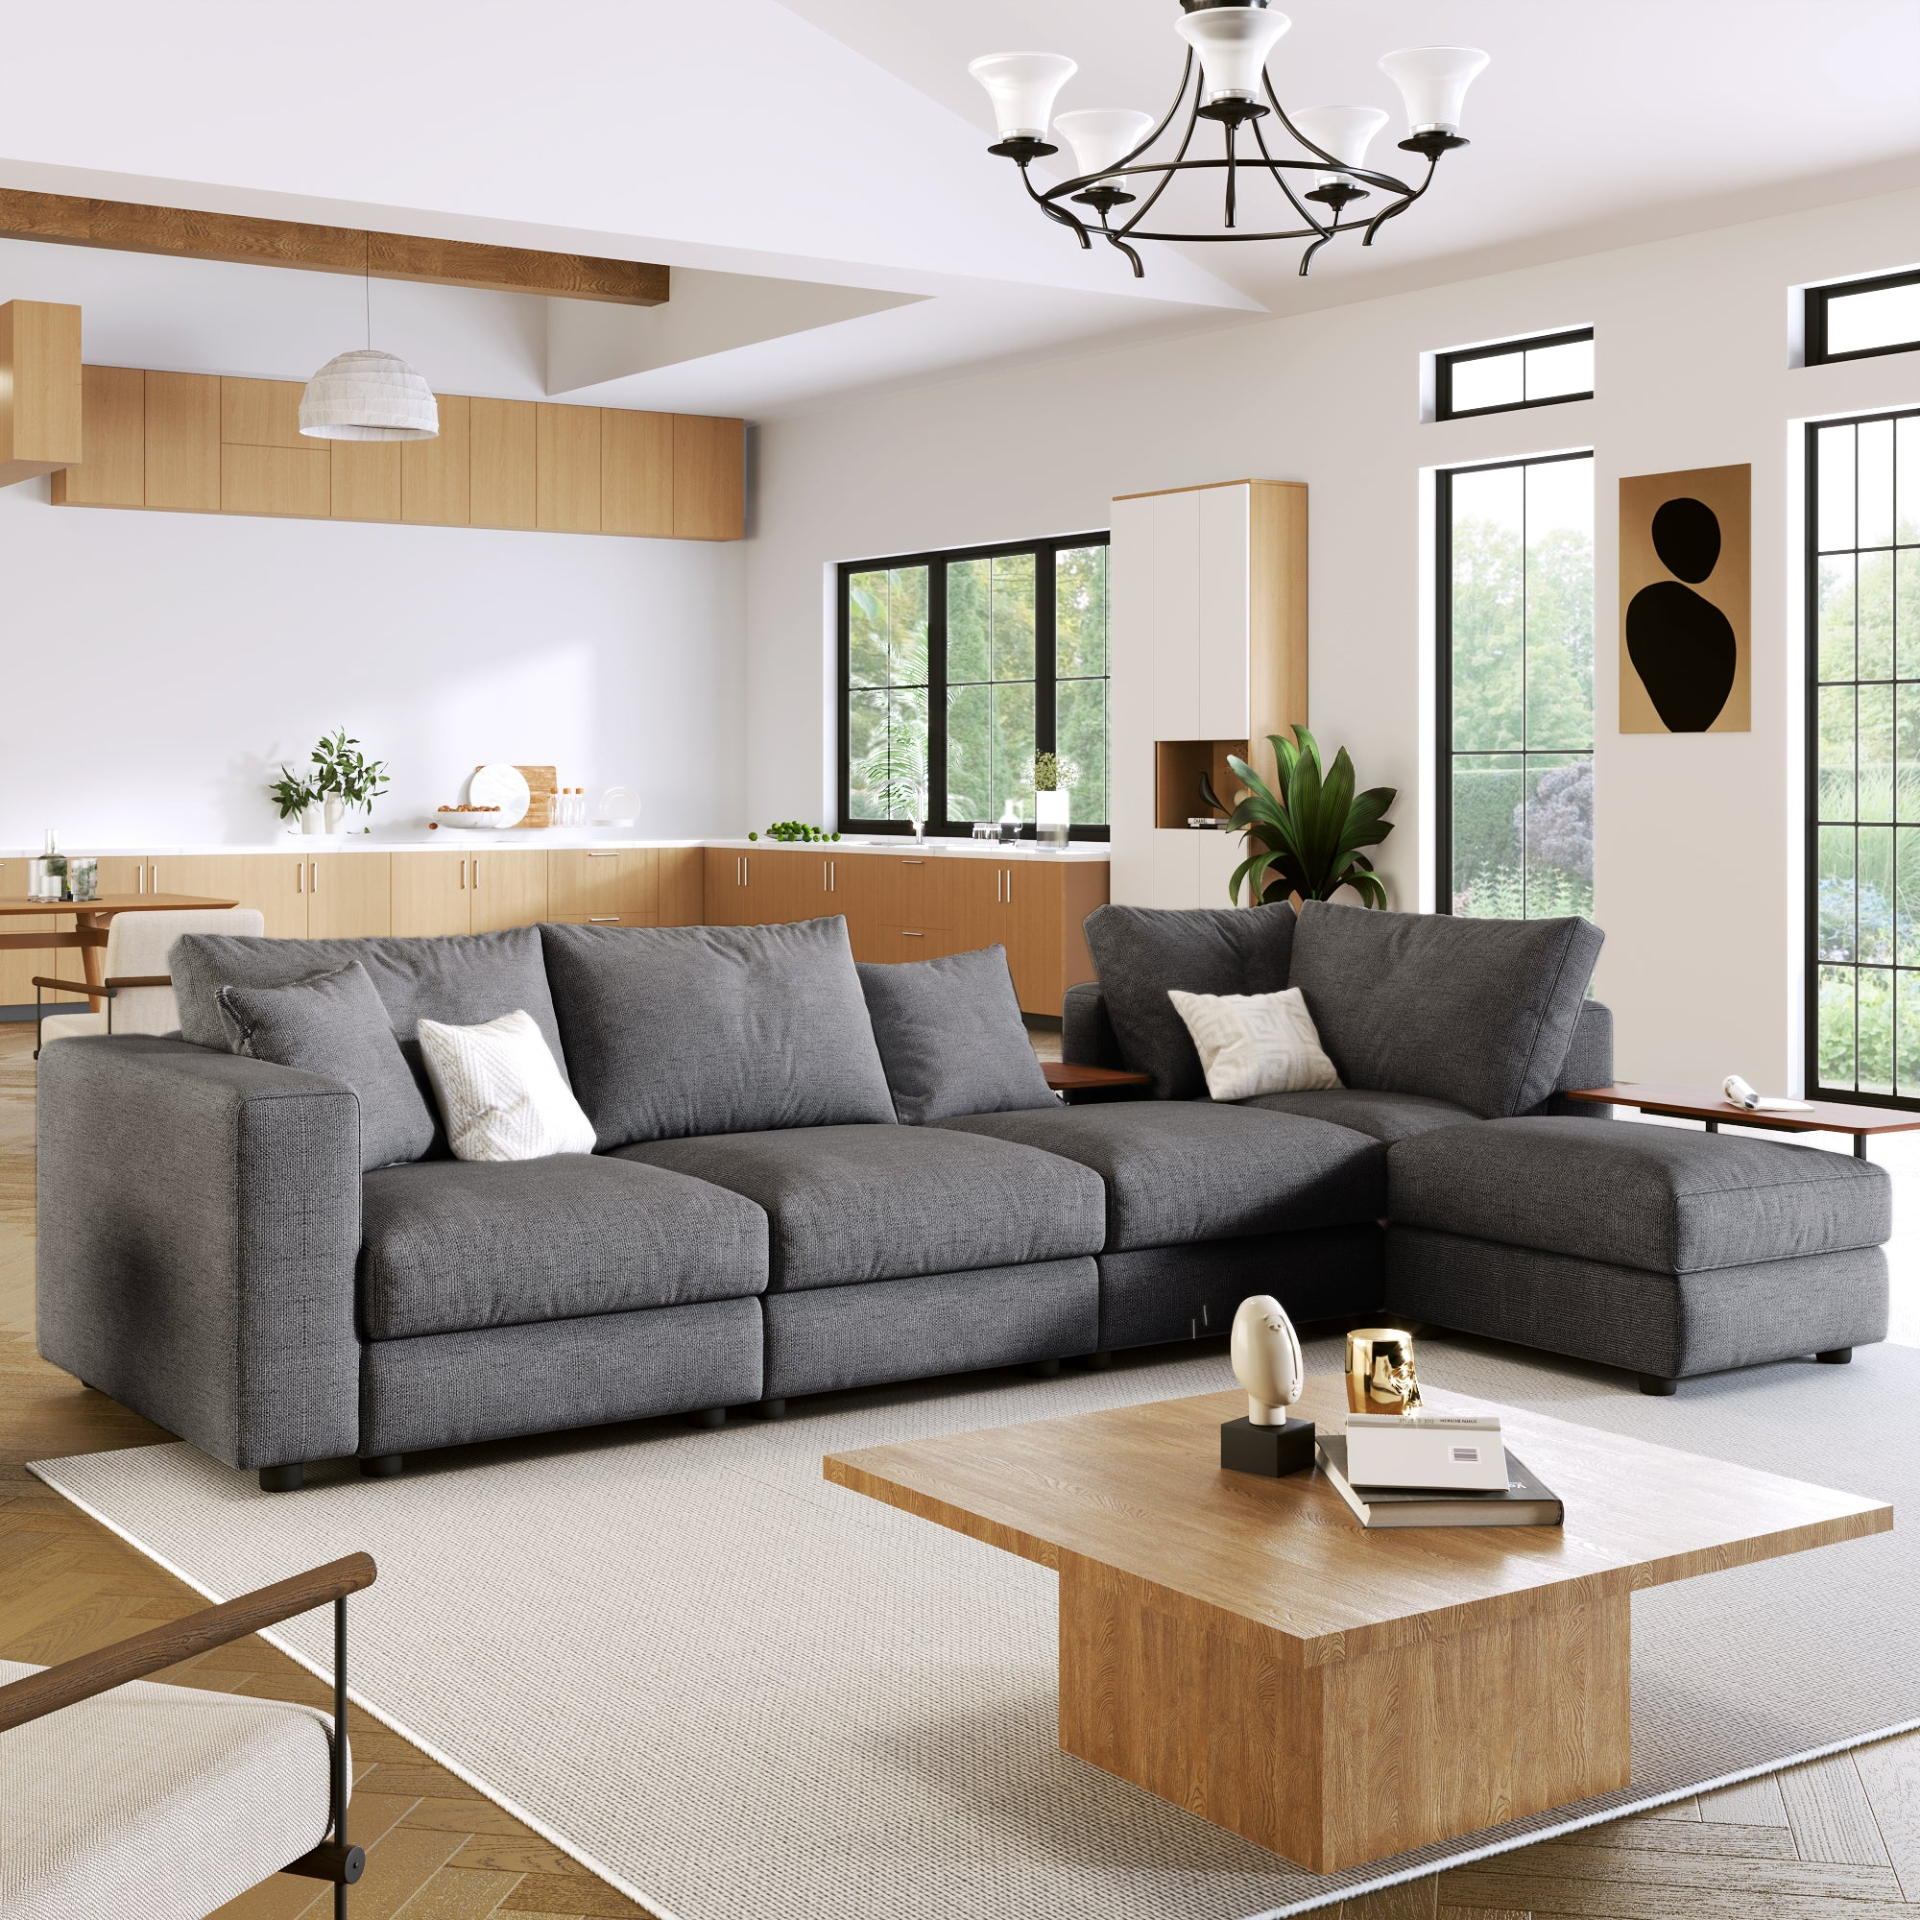 Modern Large L-Shape Sectional Sofa for Living Room, 2 Pillows and 2 End Tables